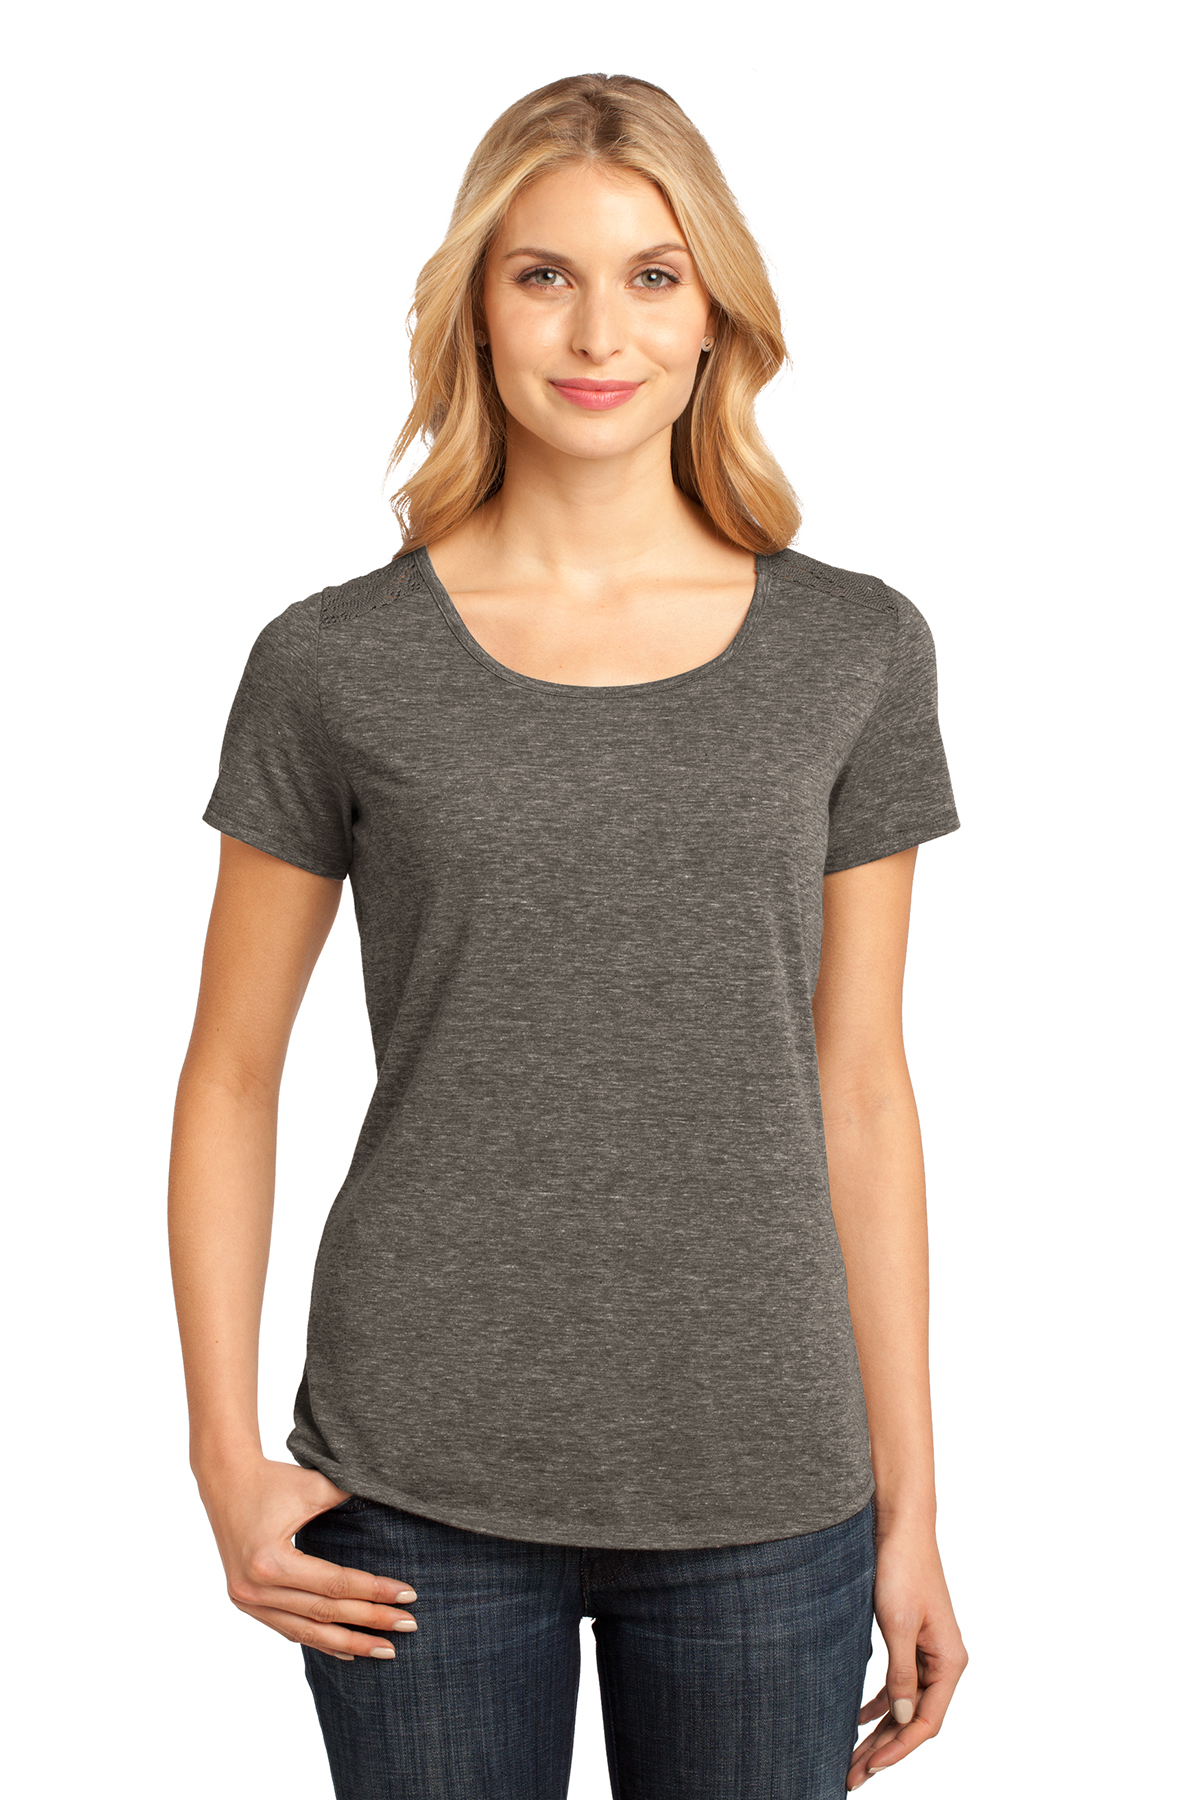 District Made - Ladies Tri-Blend Lace Tee | Product | SanMar